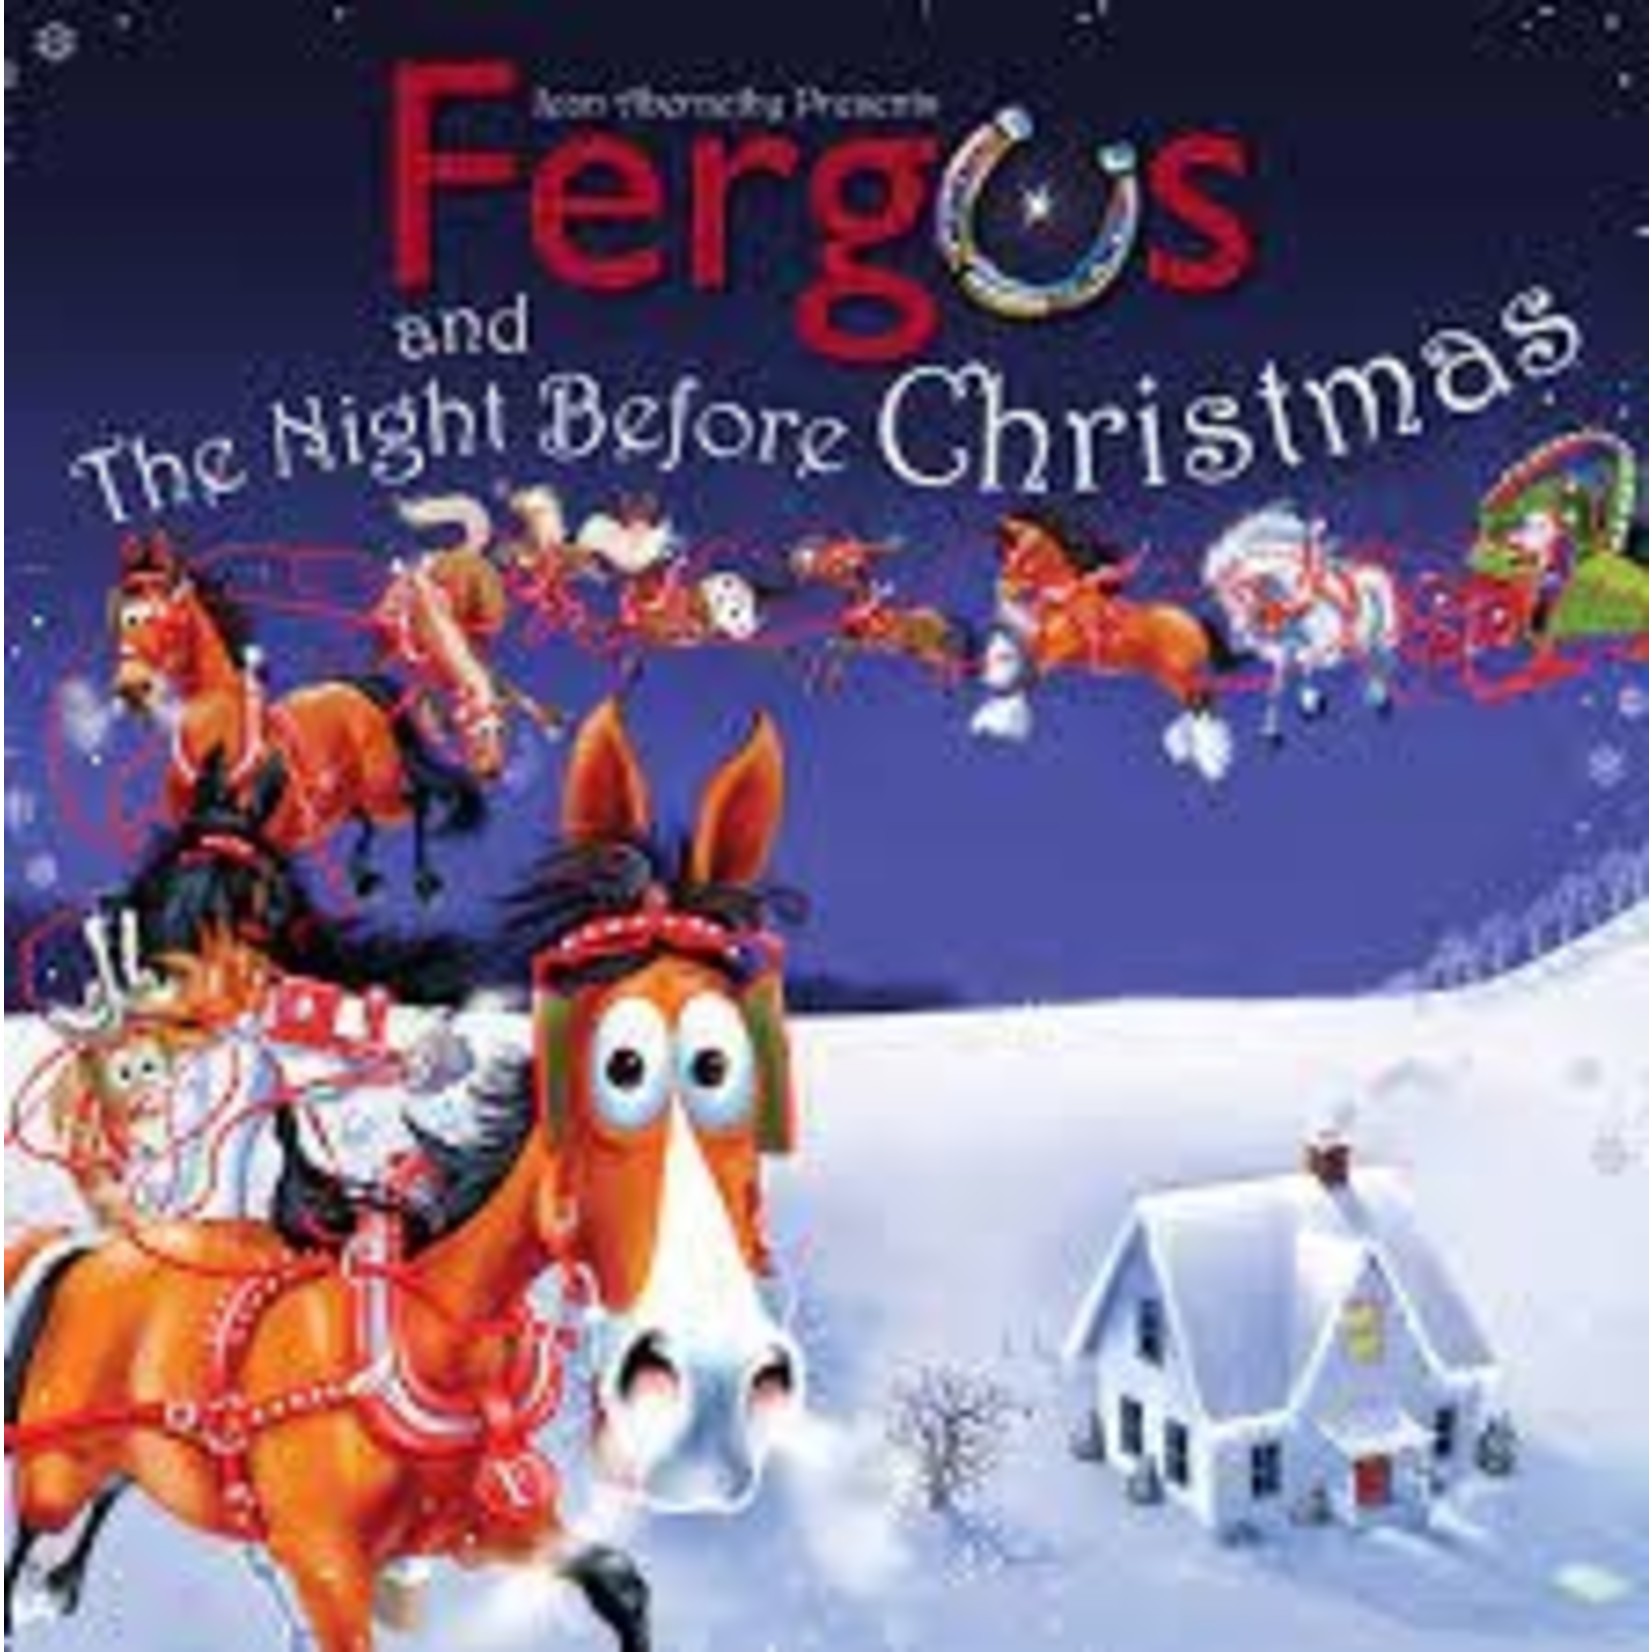 Fergus and The Night Before Christmas Book